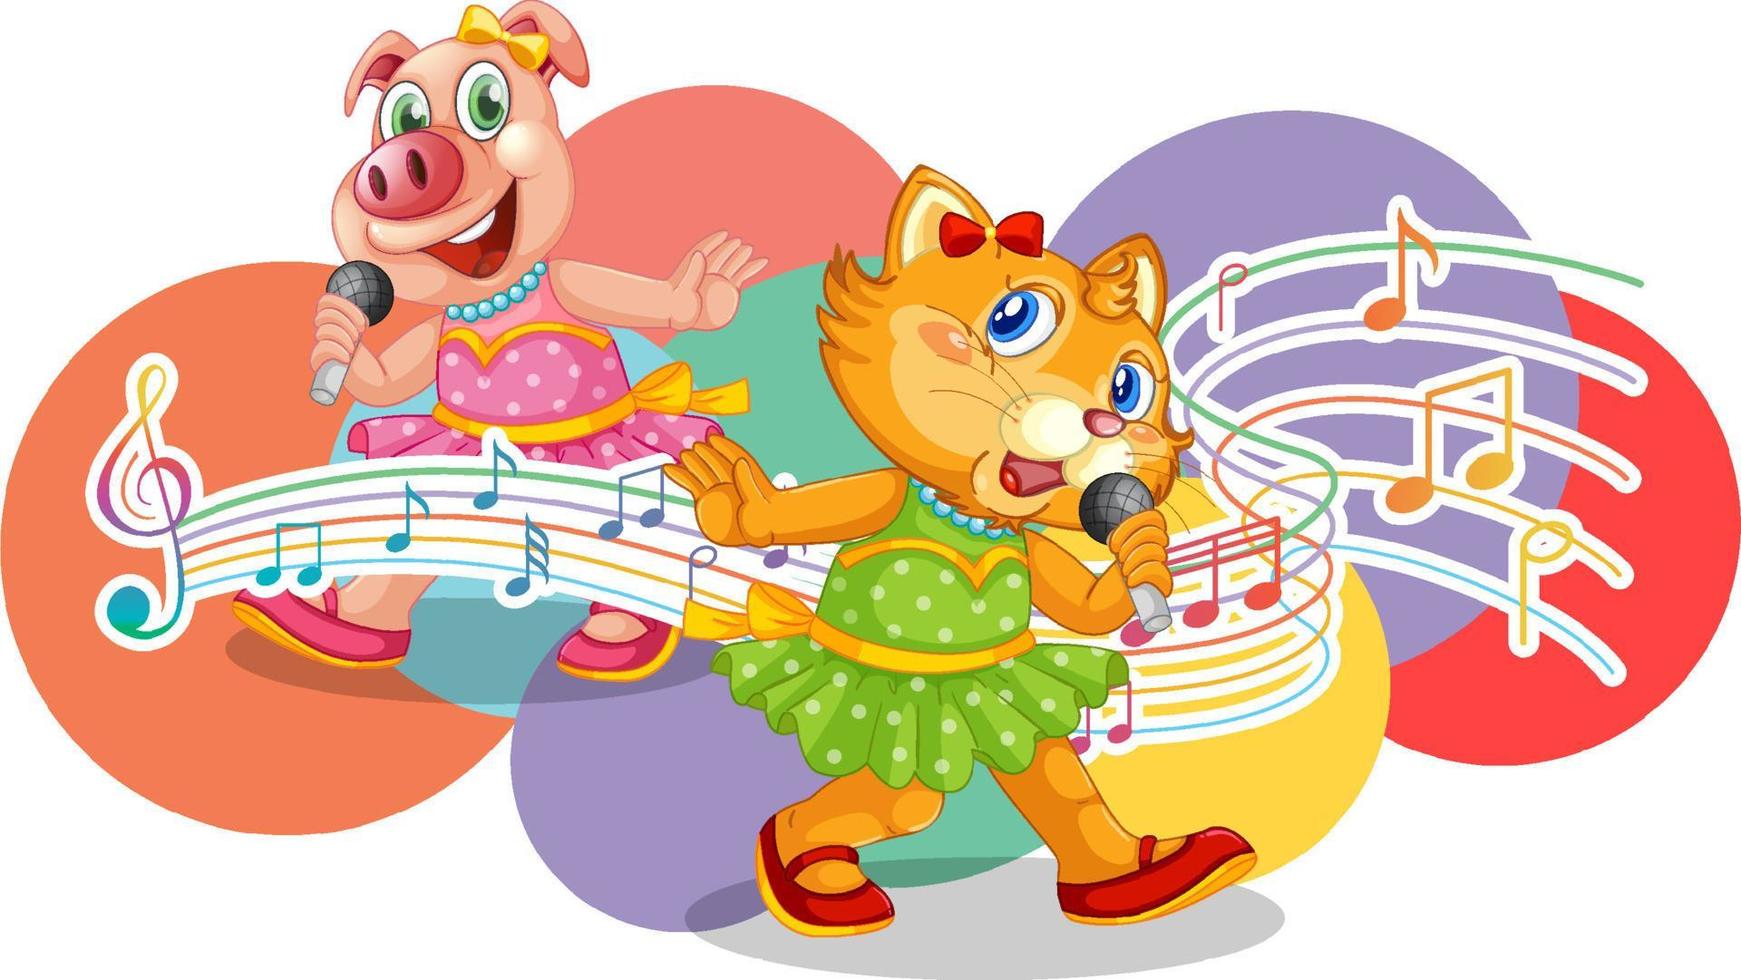 Singer cat and pig cartoon with music melody symbols vector